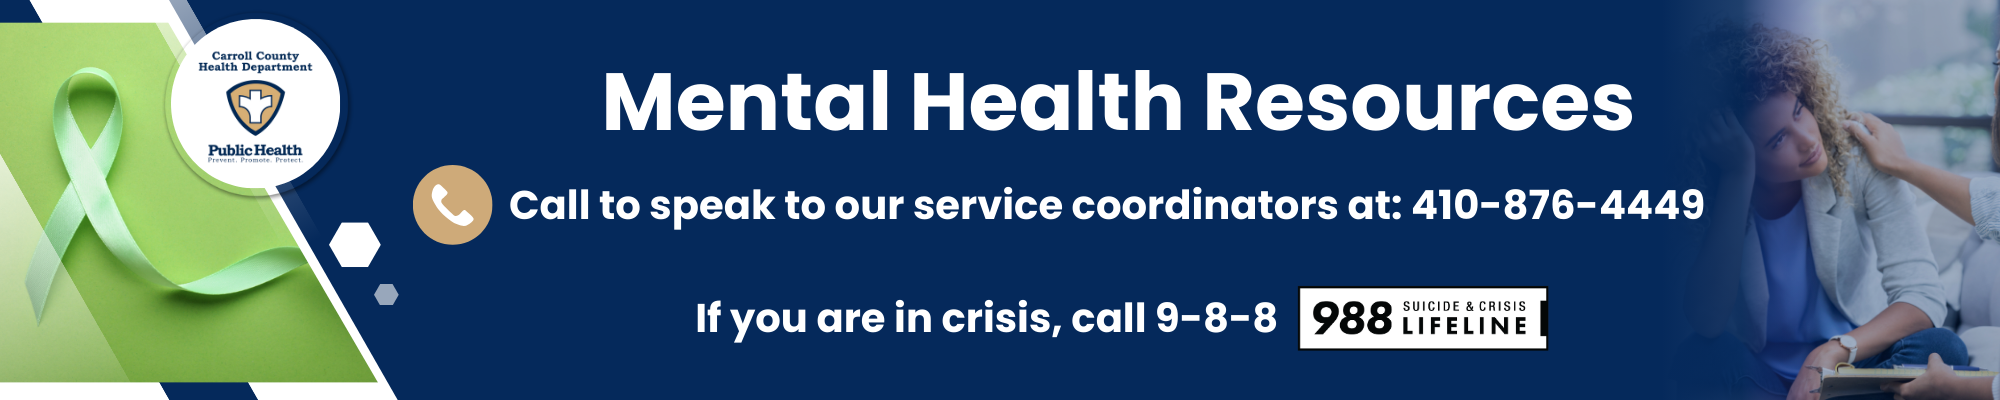 Mental health resource page banner. If you are in crisis, call 9-8-8.